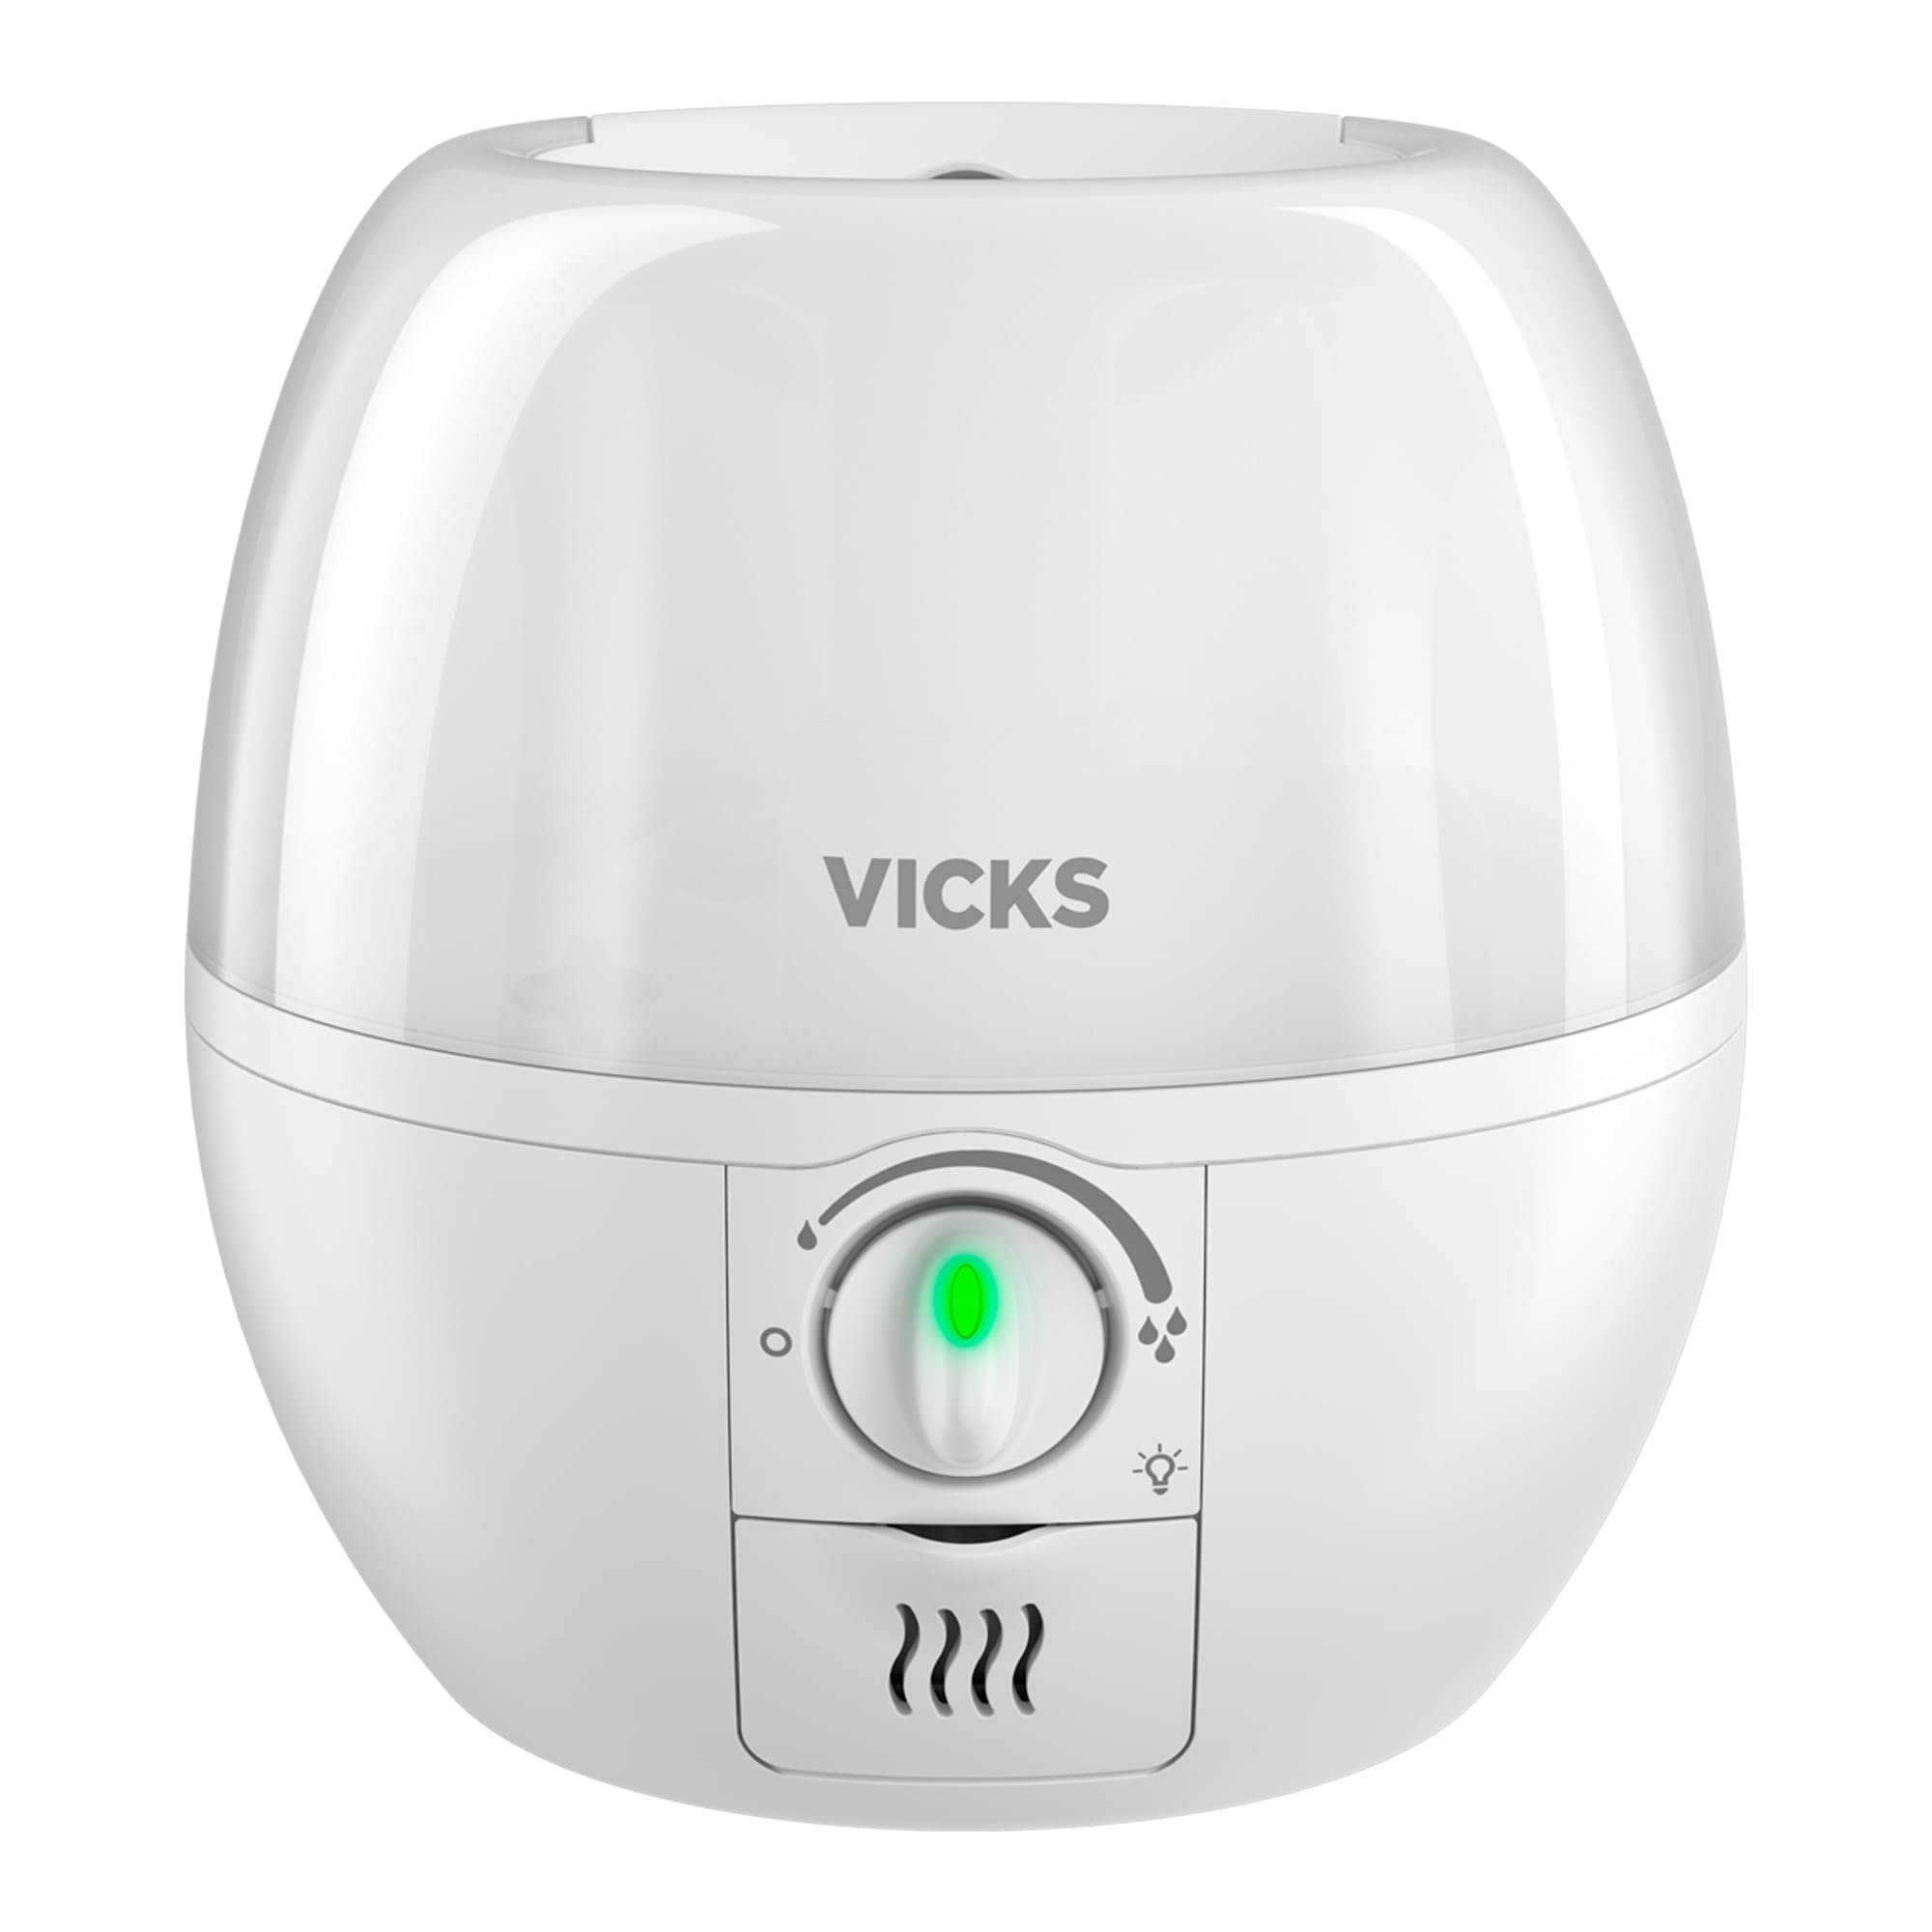 Vicks Filter-Free 3-in-1 SleepyTime Humidifier (White) $20 + Free Shipping w/ Prime or on orders over $35